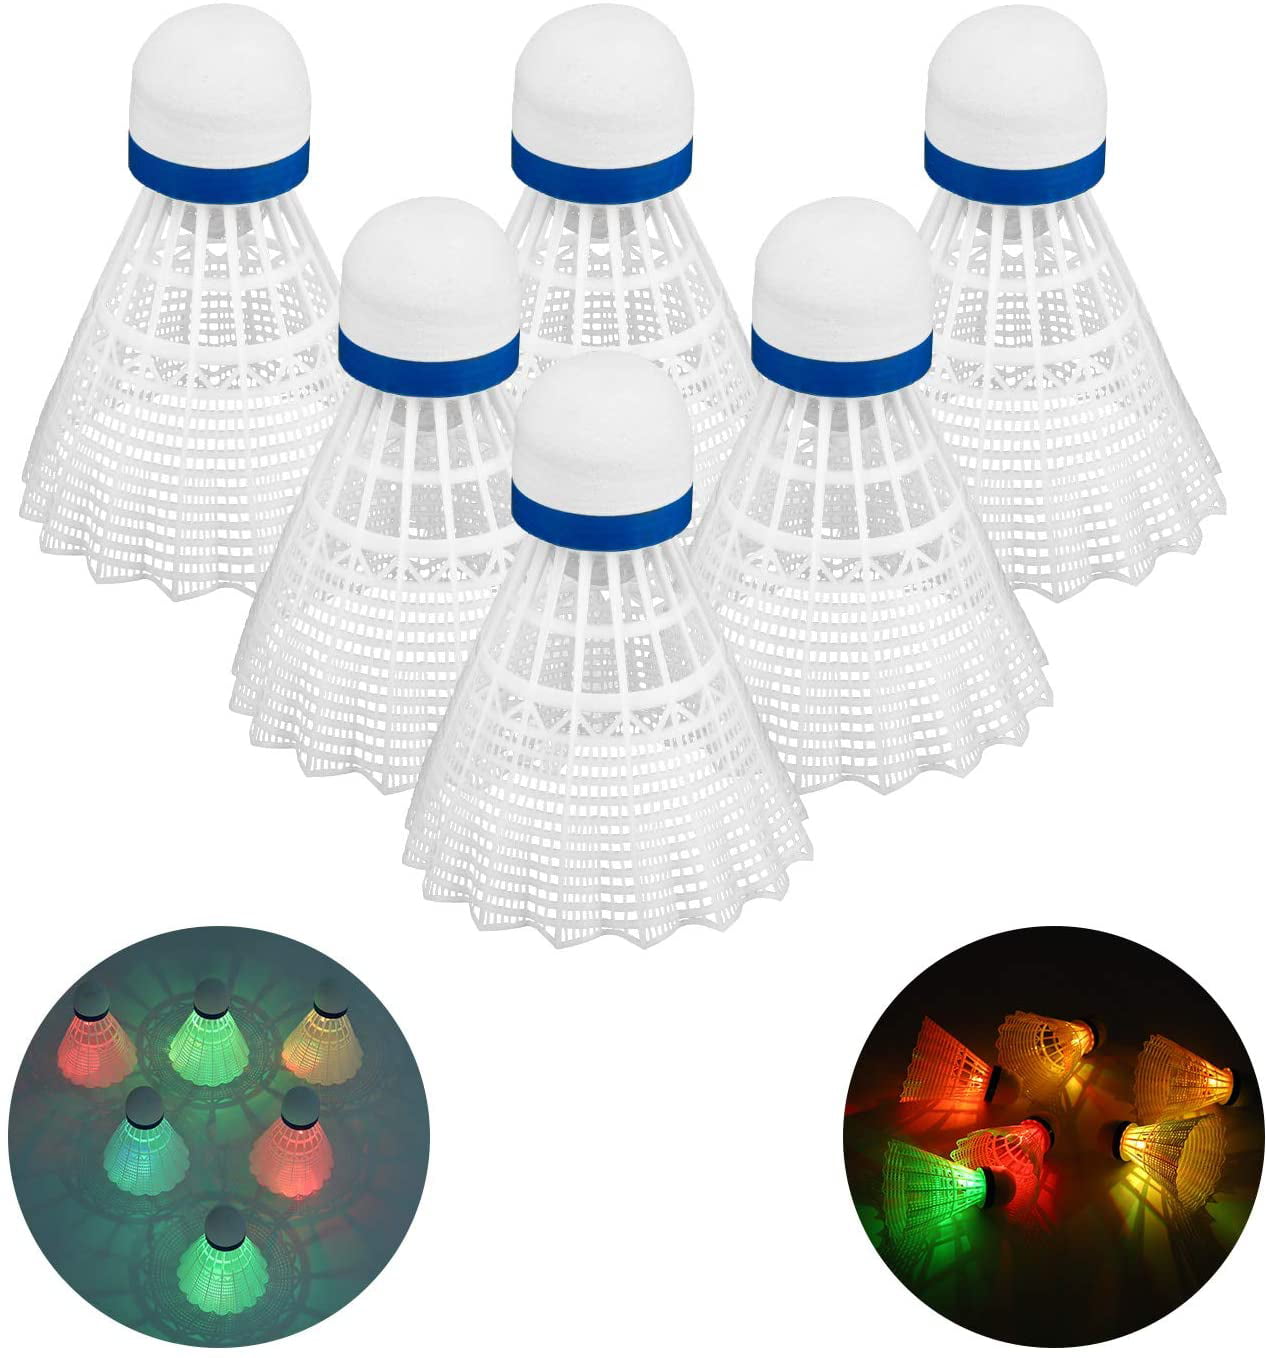 GLOGLOW 6Pcs/Set Professional Nylon Badminton Ball with Great Stability and Durability Outdoor Sports Hight Speed Training Badminton Shuttlecocks 